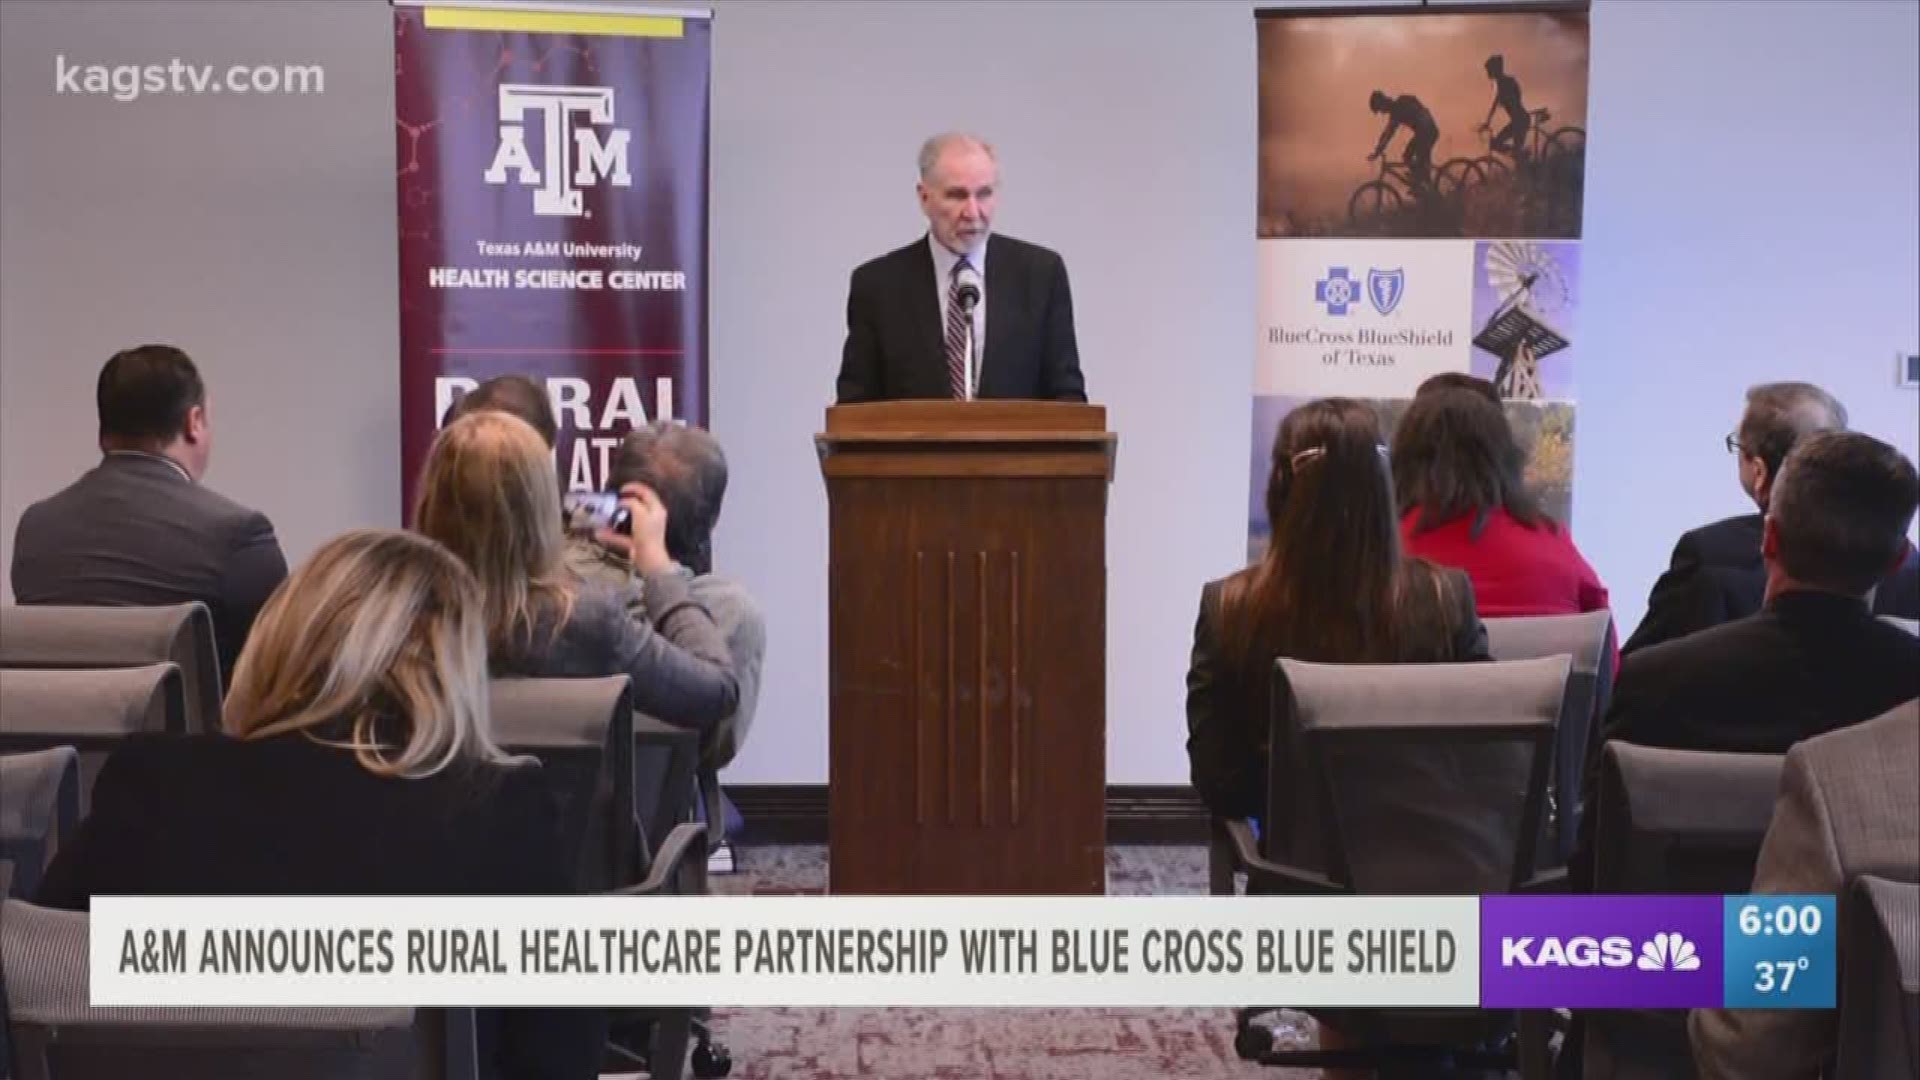 Texas A&M University and Blue Cross Blue Shield of Texas announced a new collaborative project to identify and solve the health care challenges facing rural Texas communities.